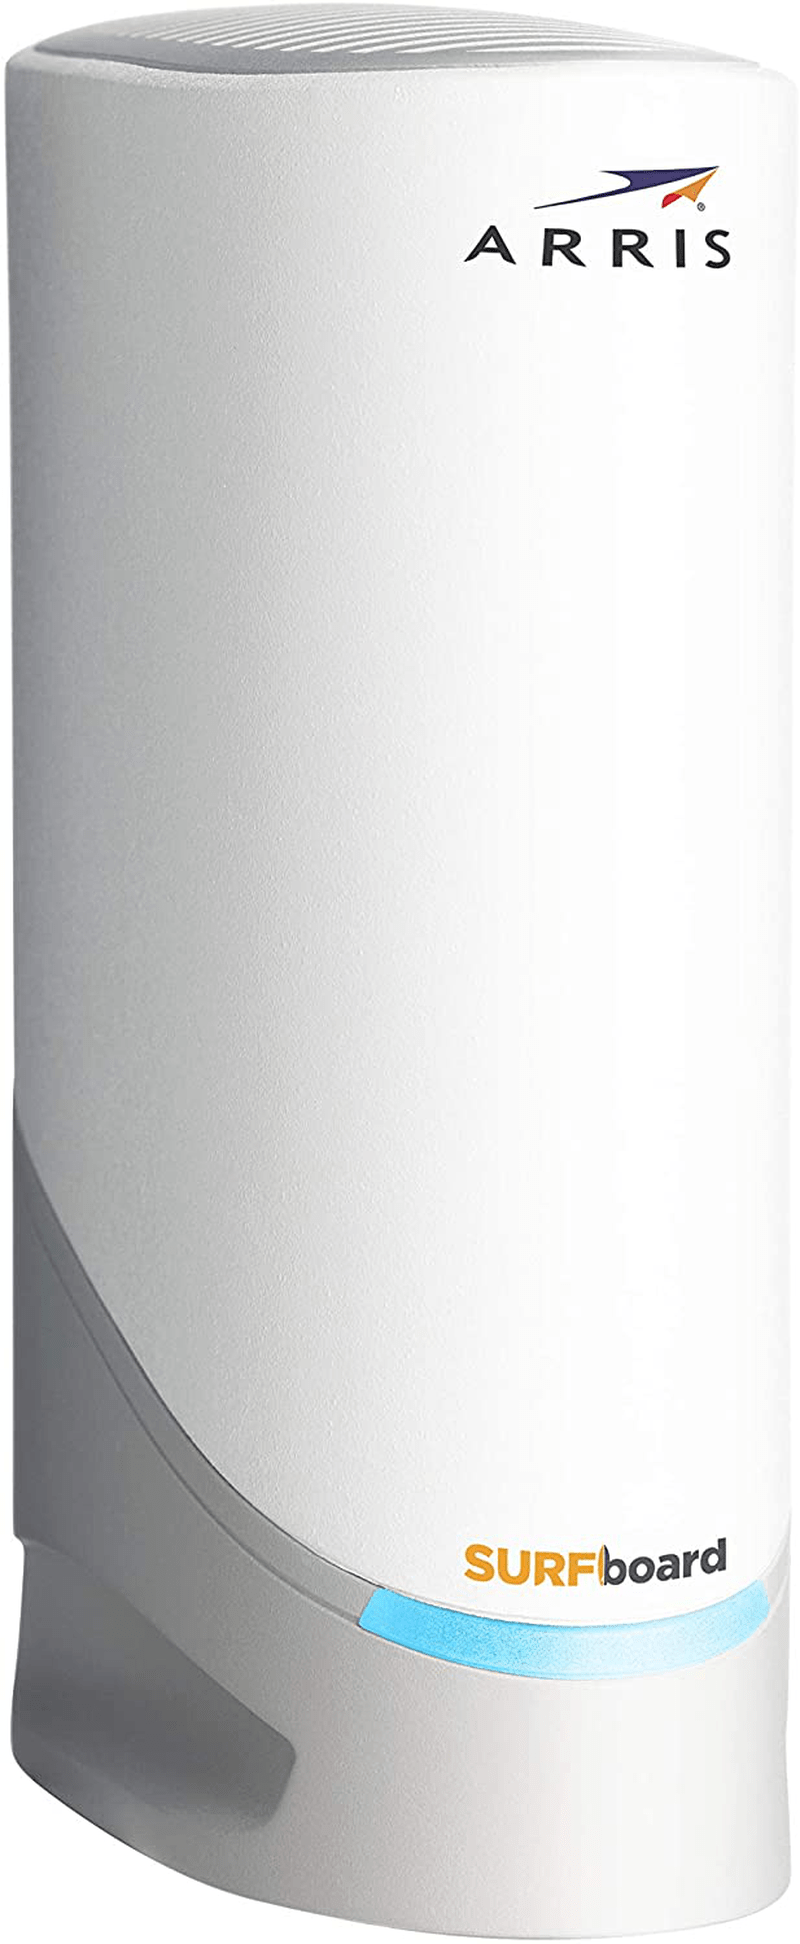 ARRIS Surfboard S33 DOCSIS 3.1 Multi-Gigabit Cable Modem with 2.5 Gbps Ethernet Port, Approved for Cox, Xfinity, Spectrum & Others.